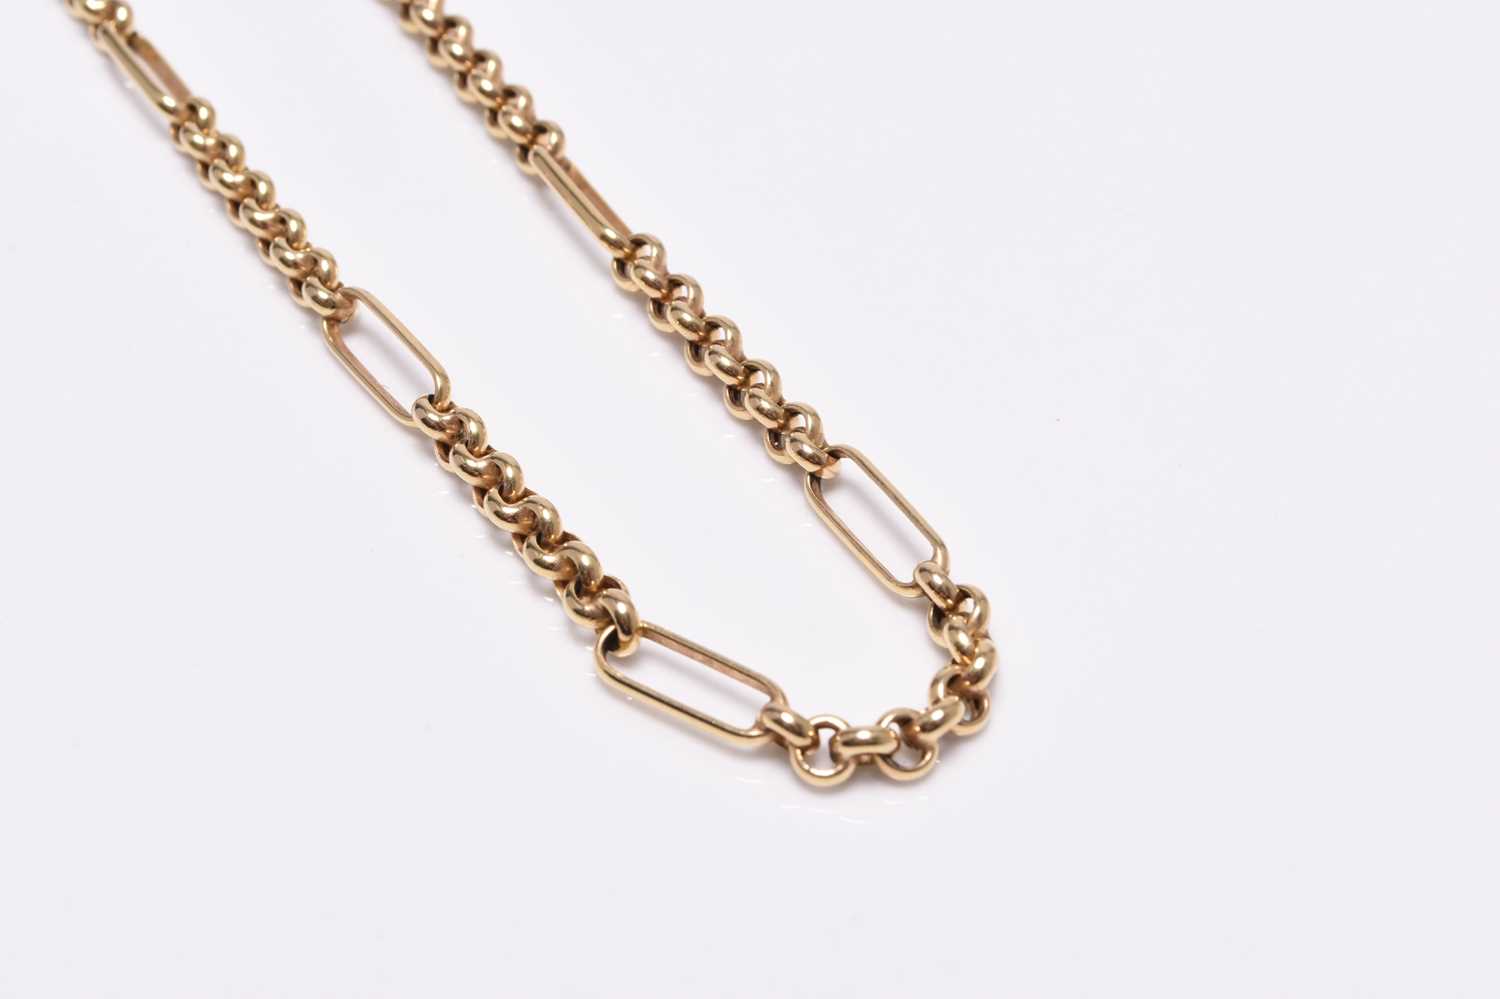 A 9ct gold belcher and elongated link chain necklace